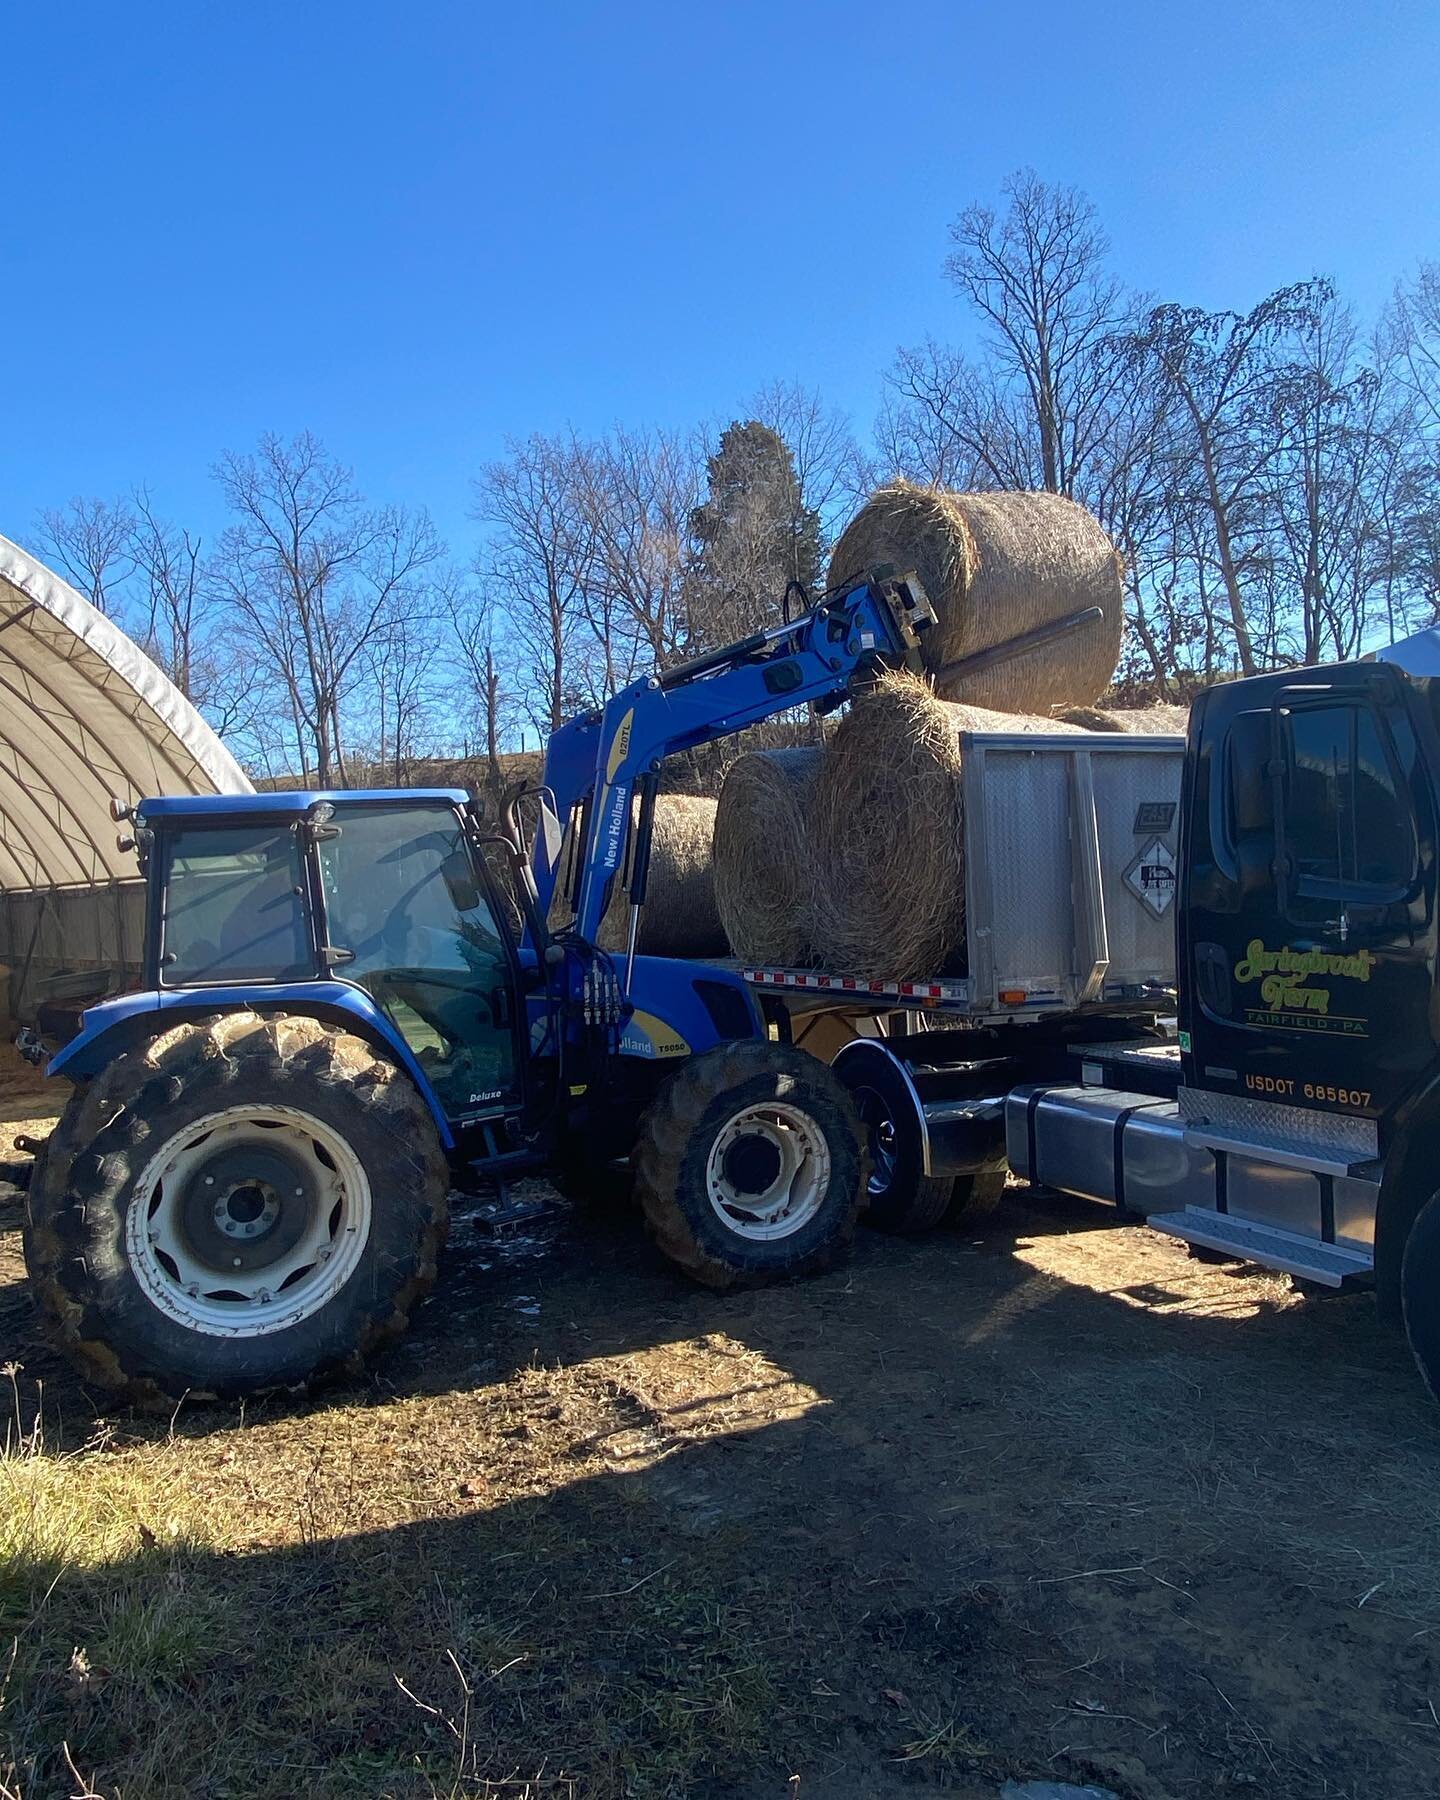 Our good Friend, Kevin, from Springbrook Farm recently brought us two loads of hay to help keep us stocked up for the winter! Uncle Bob and Kevin have been working together for many years, and it is relationships like this that make up the backbone o